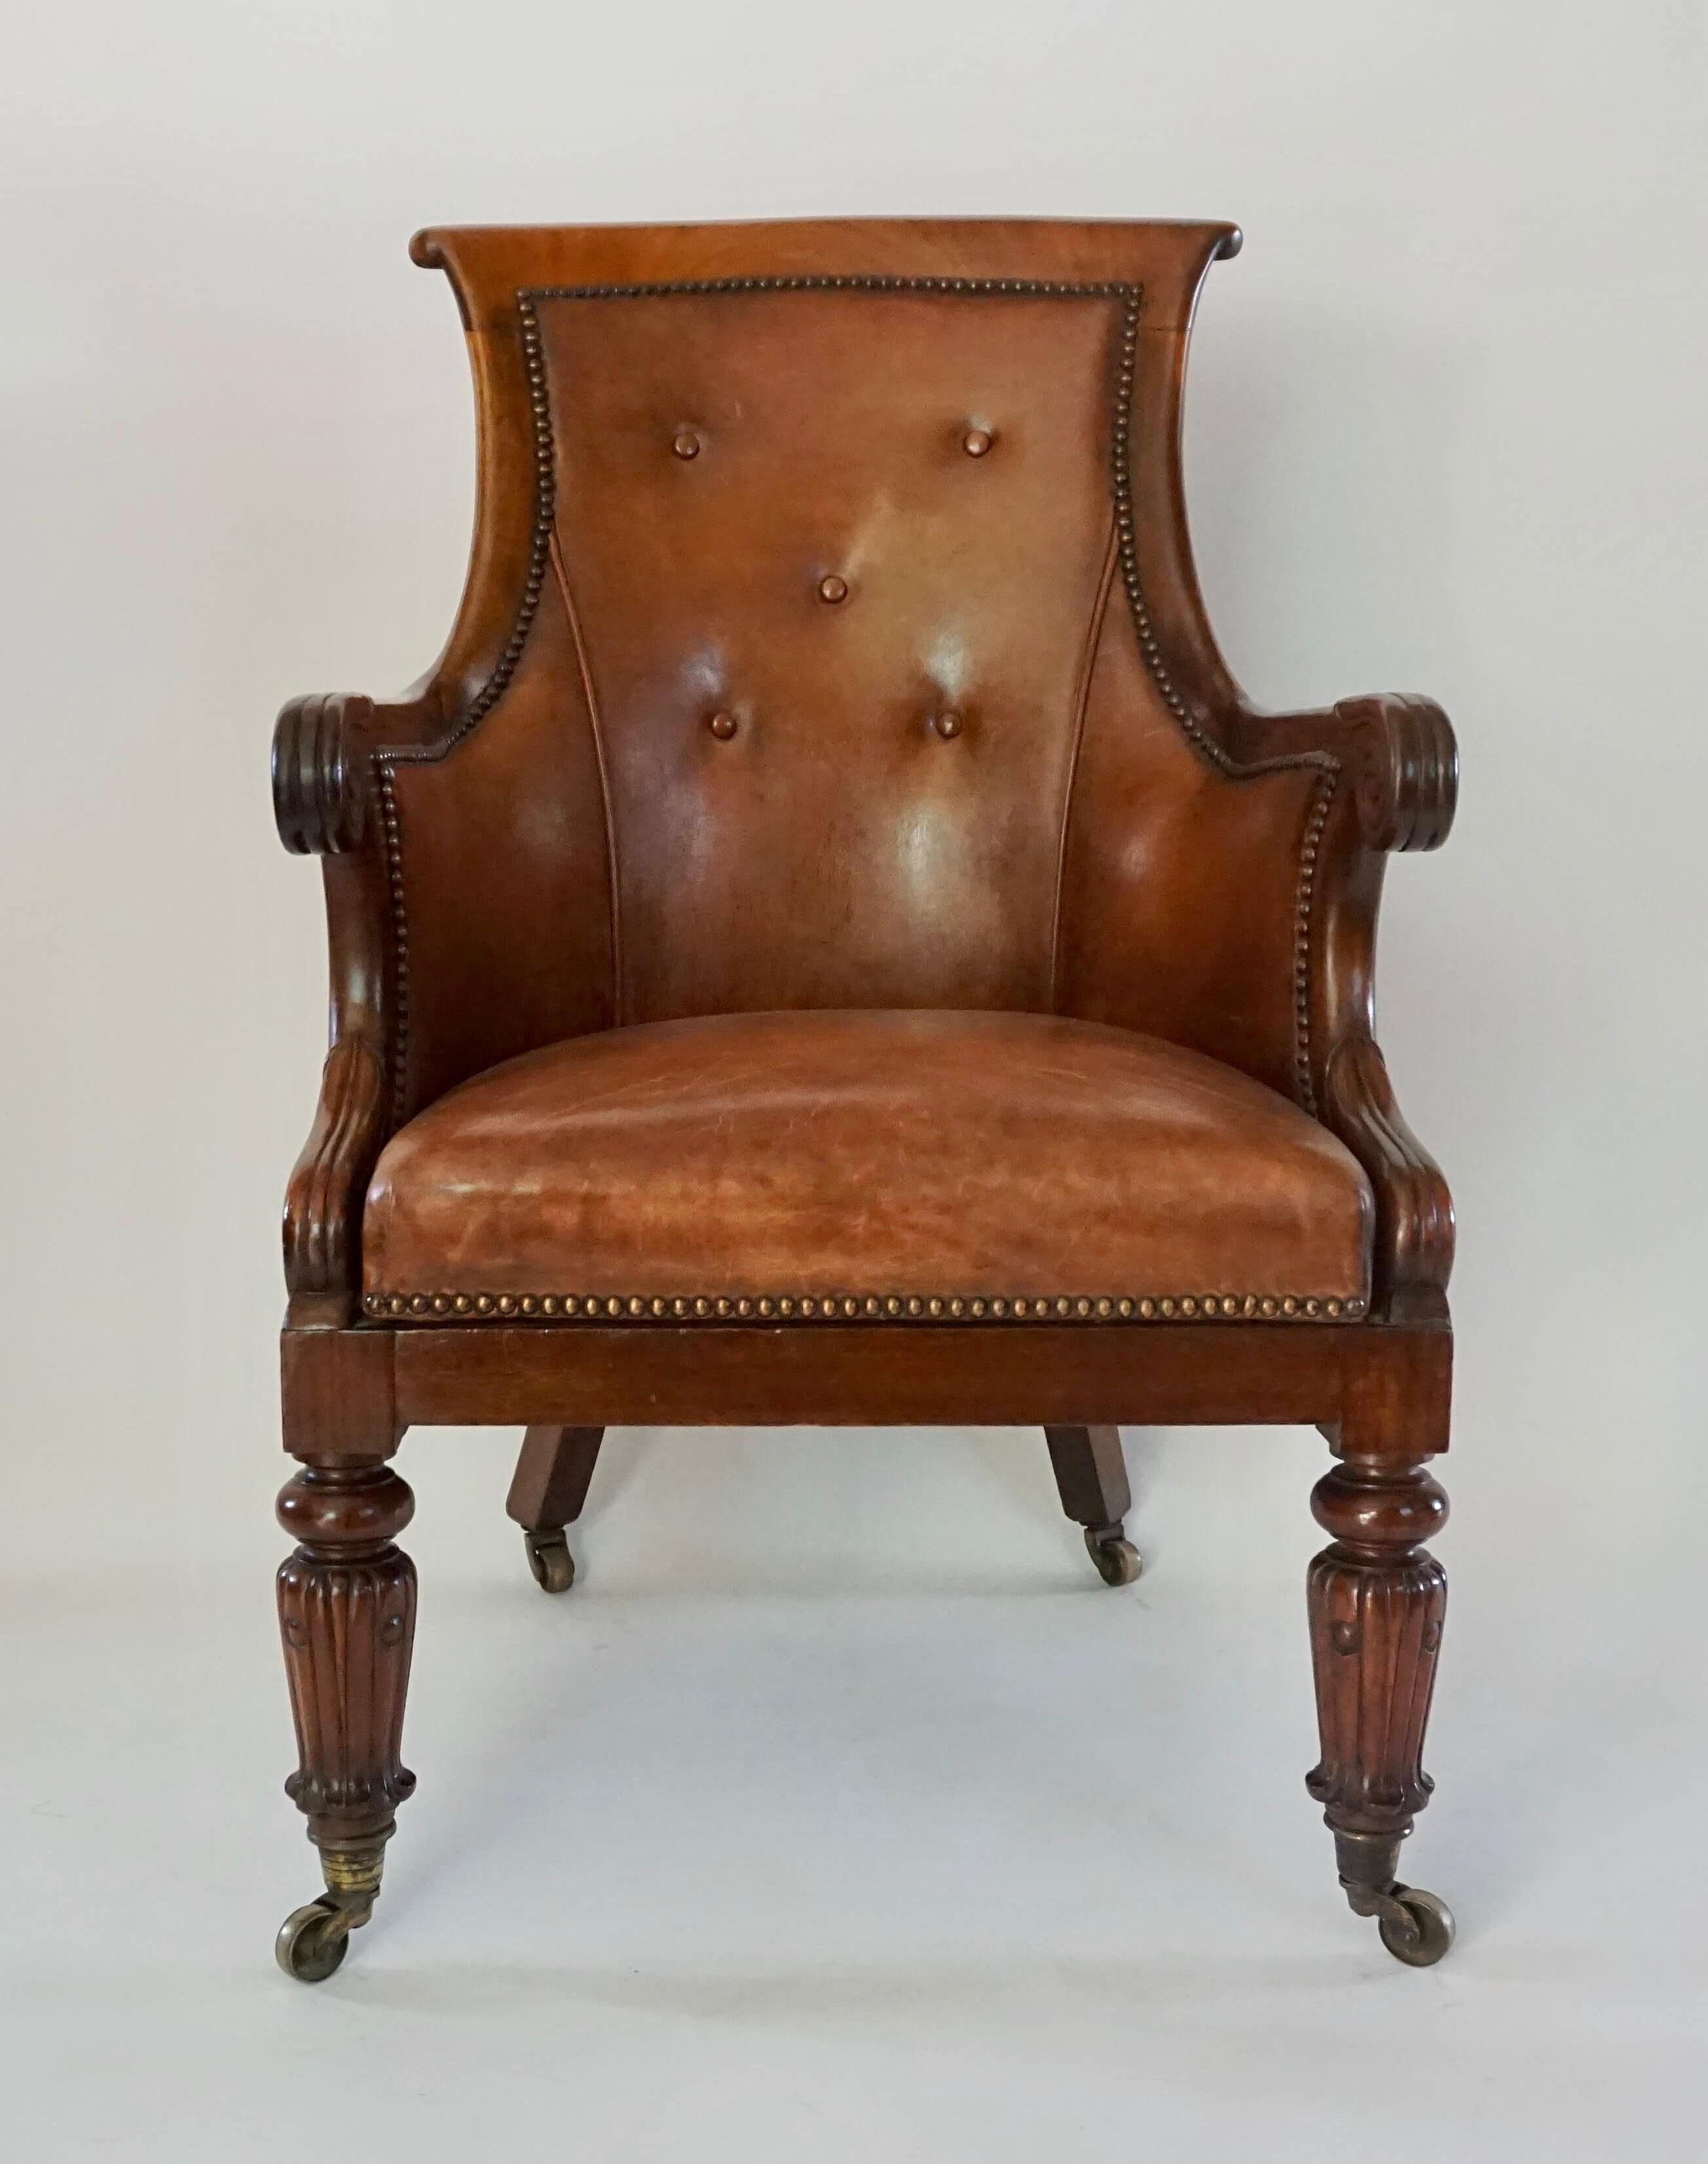 Elegant circa 1835 late English Regency period neoclassical bergère or armchair having mahogany frame and leather upholstery; the curved scrolled crestrail joining stiles continuing into acanthus-capped arms and concave supports around D-shaped